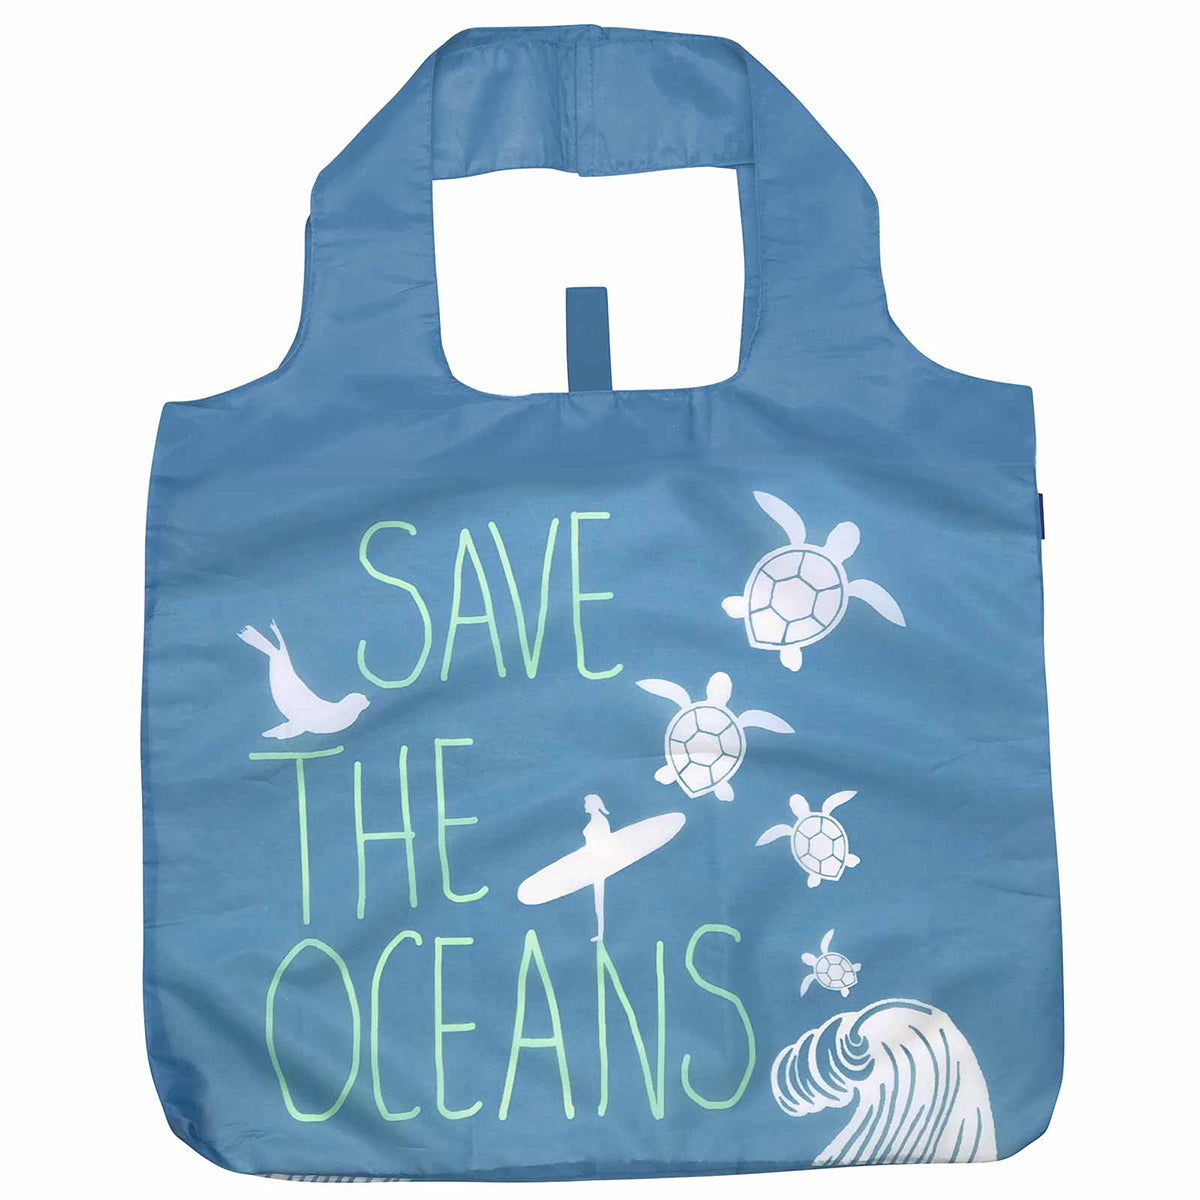 Rockflowerpaper's BLU BAG SAVE THE OCEANS, featuring illustrations of sea turtles, a dolphin, and a whale.